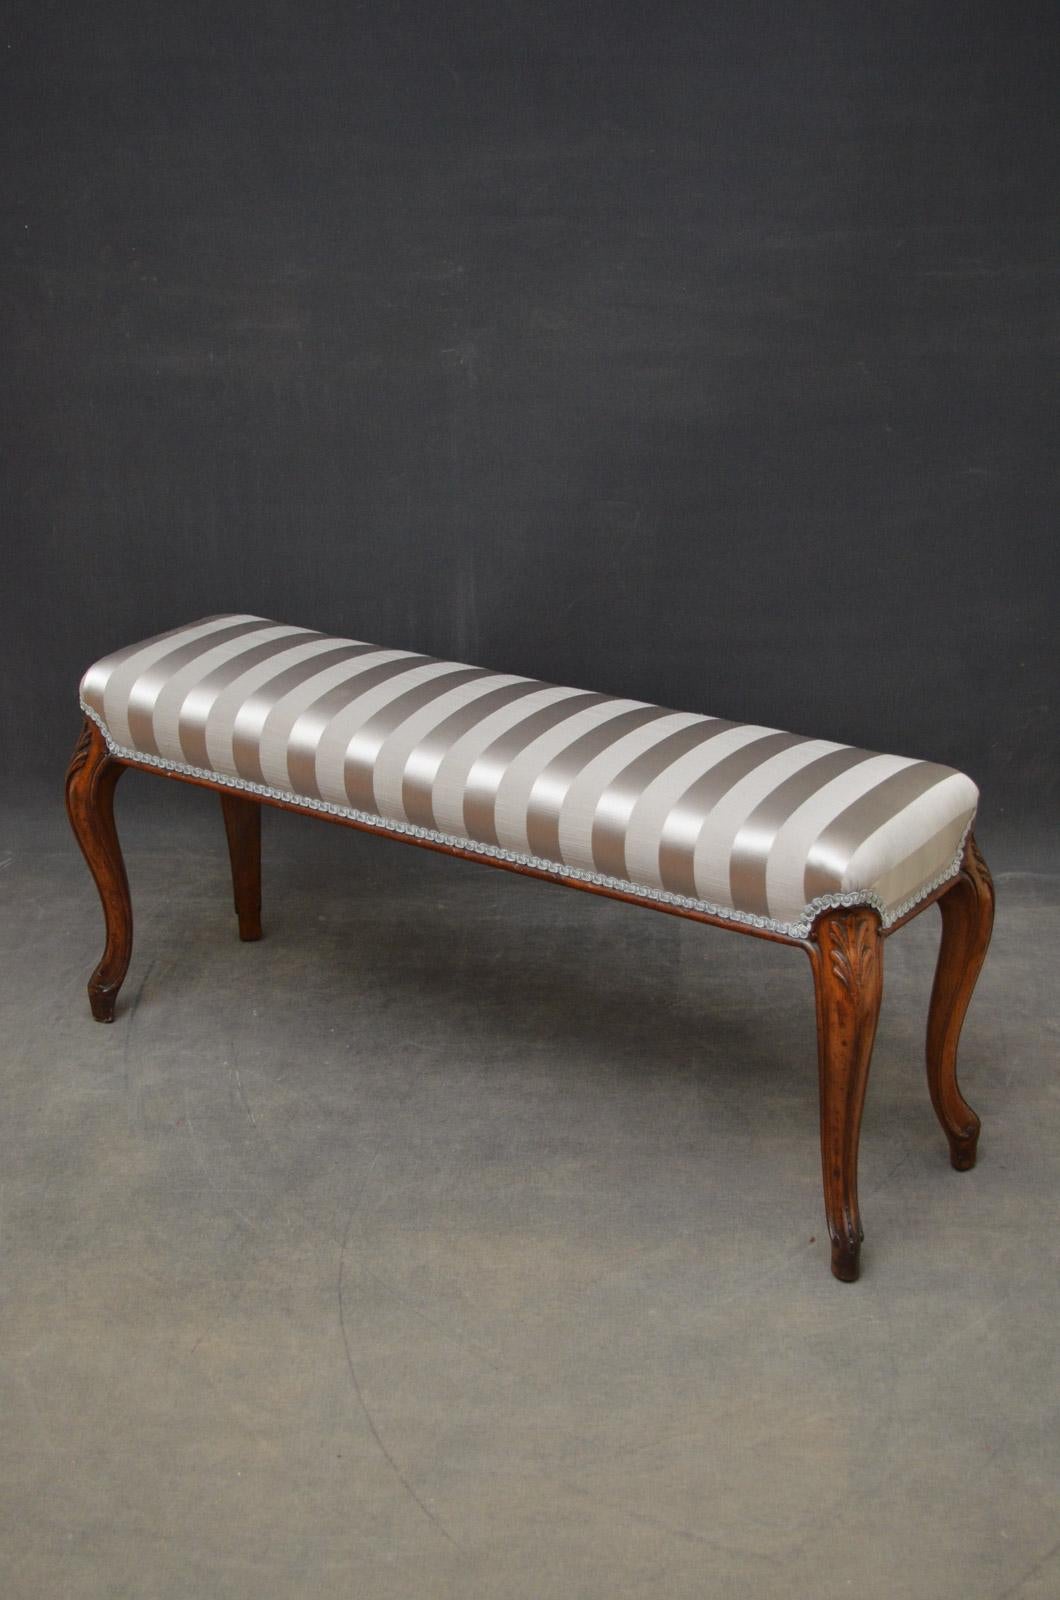 Sn4534, an attractive Victorian window seat in walnut, having rectangular seat recovered in silver / grey fabric and standing on cabriole legs united by moulded frame. This antique stool is in excellent condition throughout, ready to place at home,